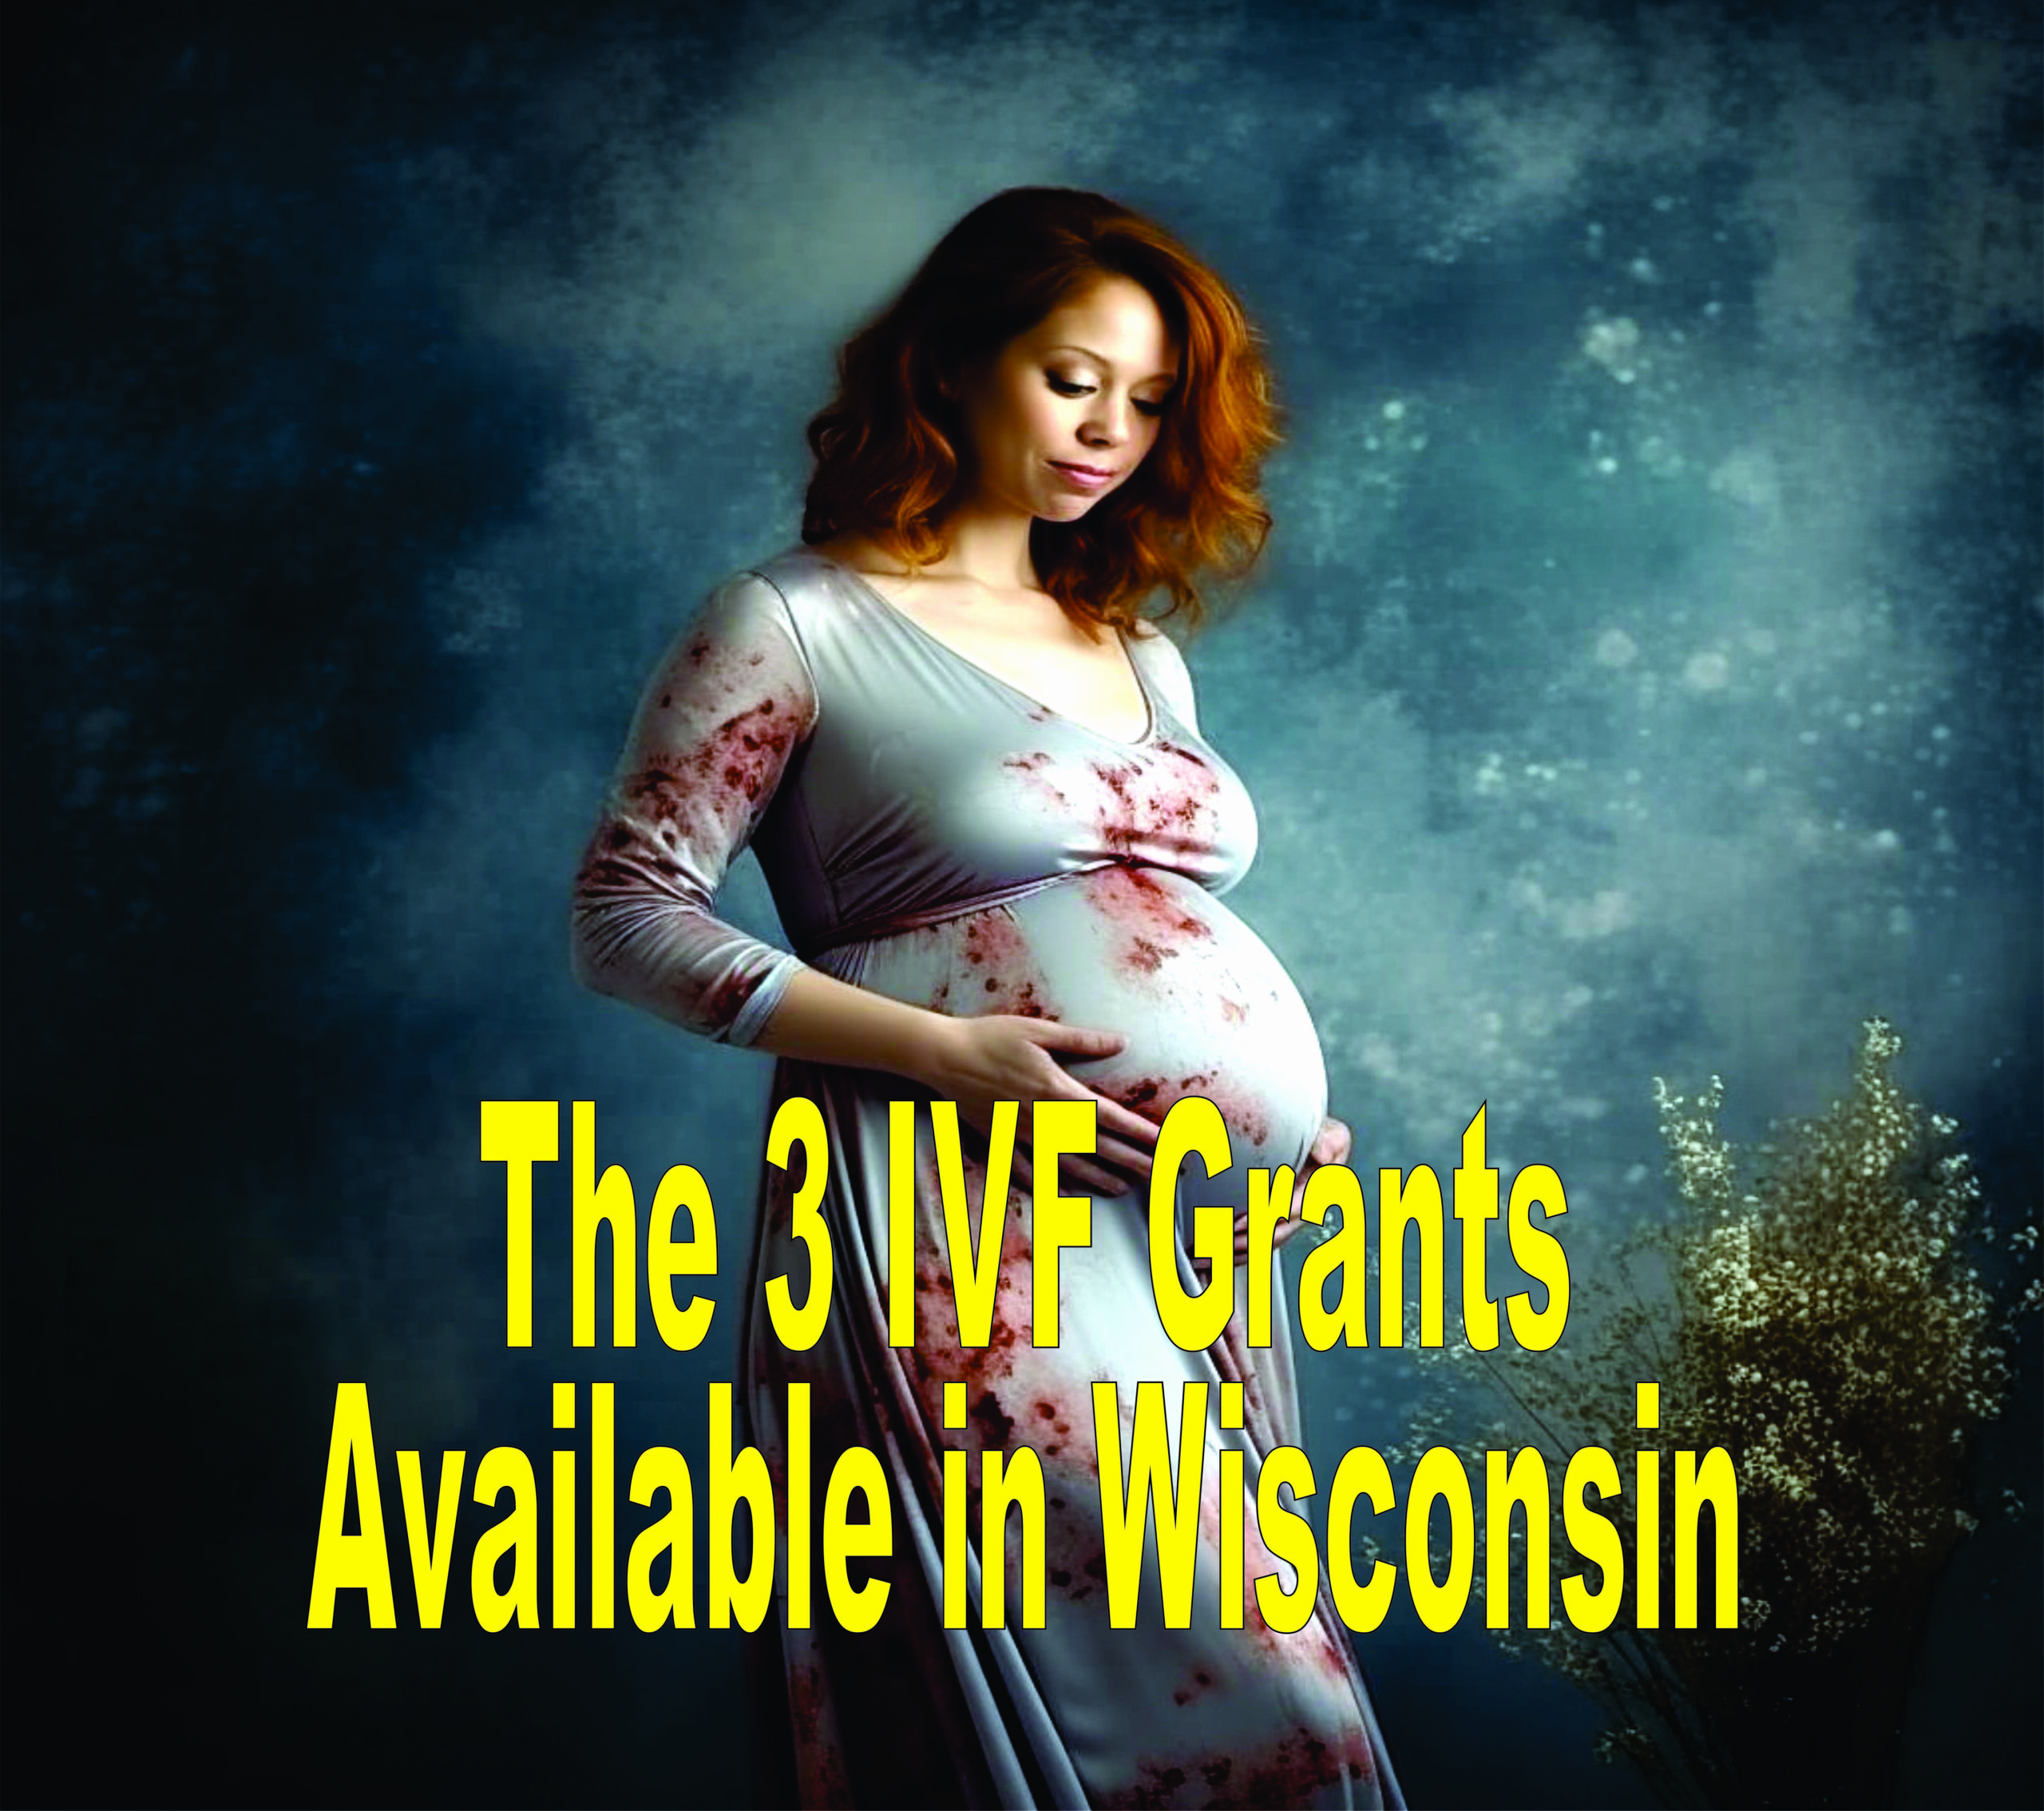 The 3 Ivf Grants Available In Wisconsin